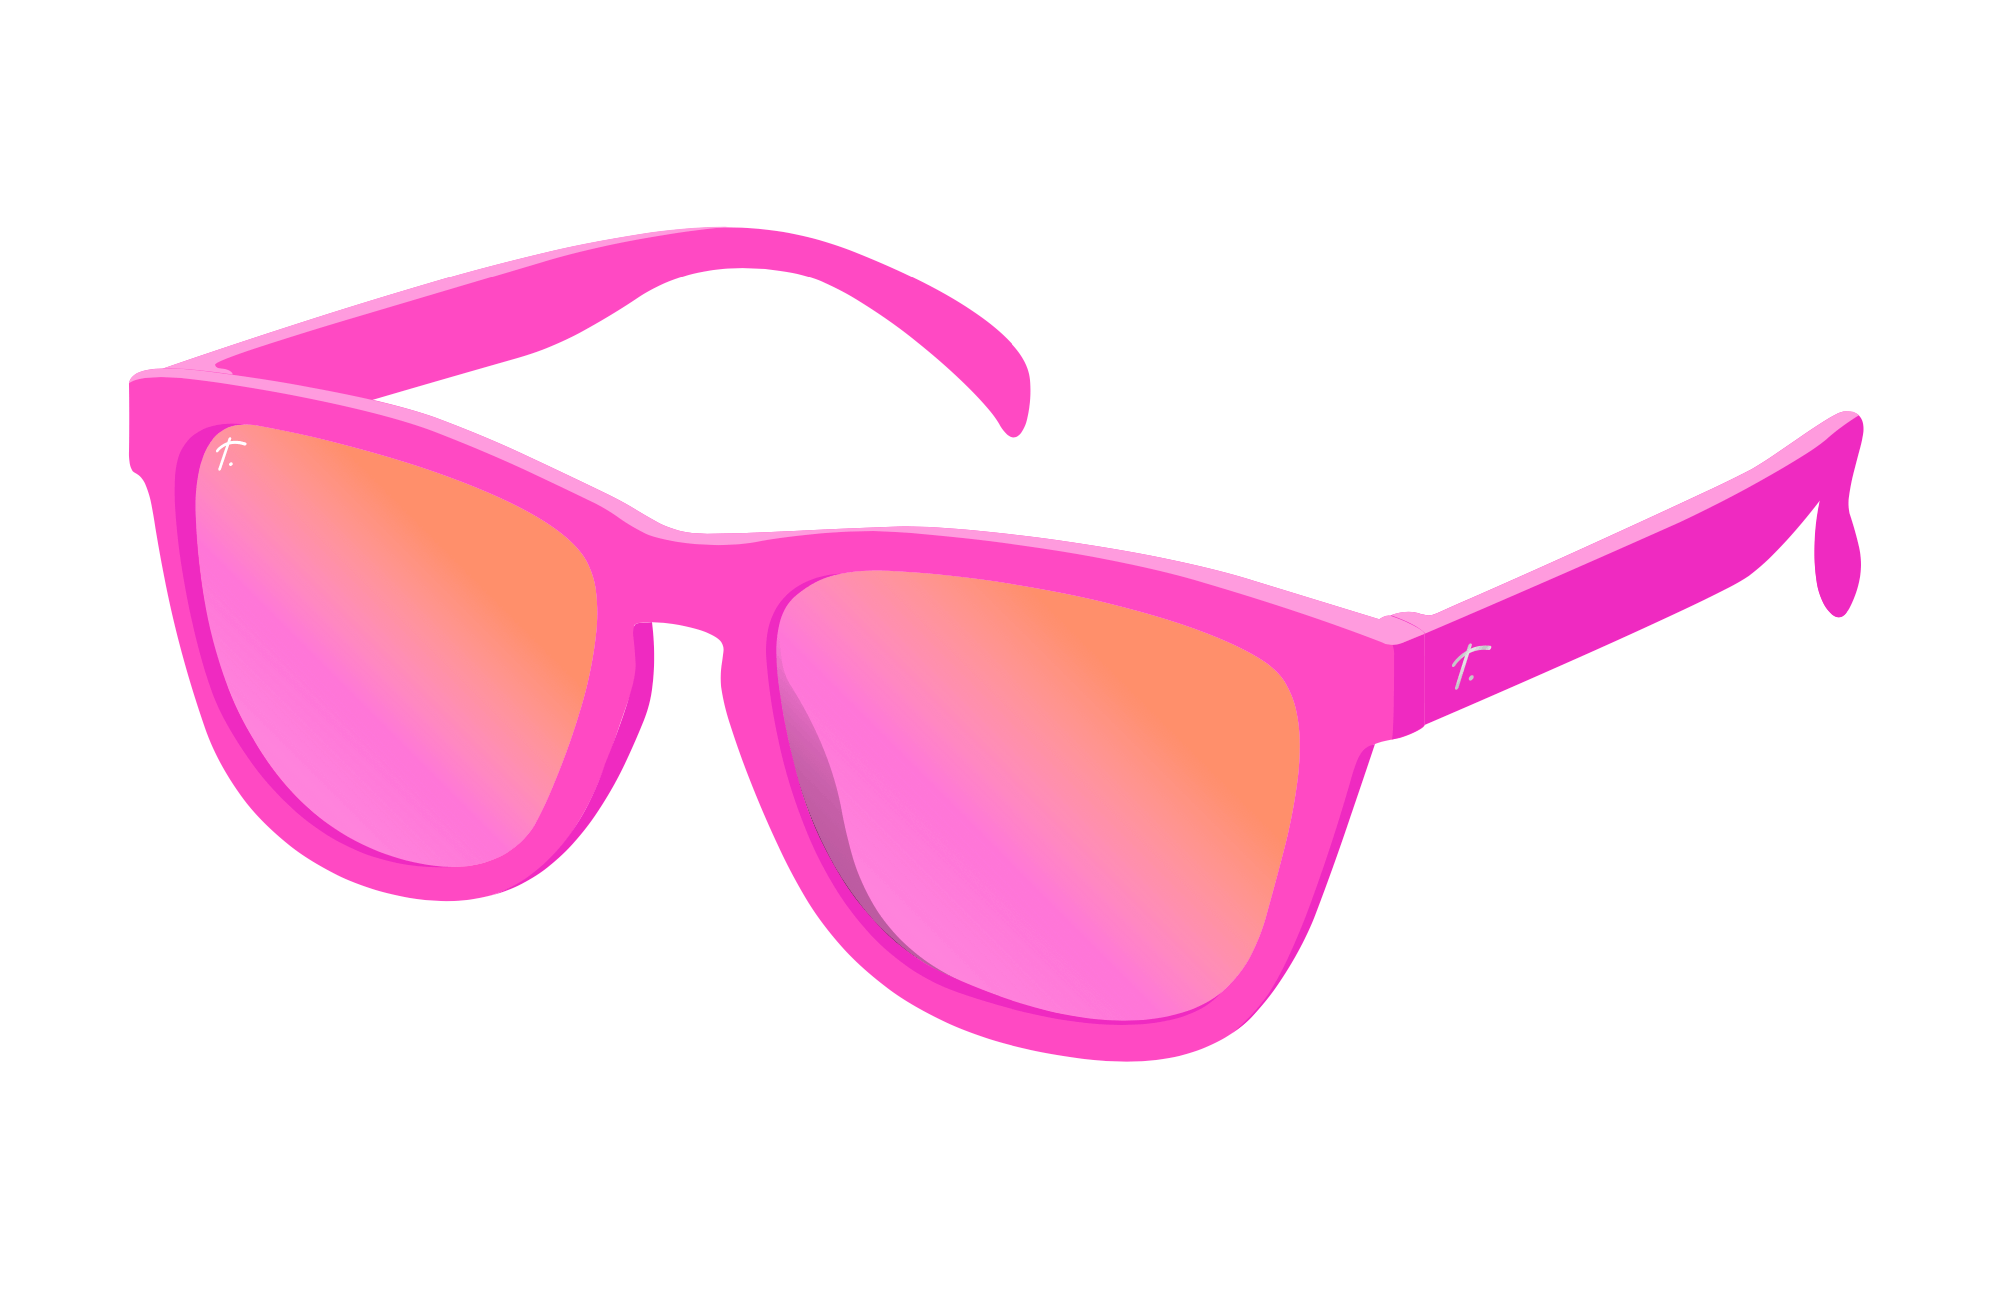 Pink sunglasses for runners by Tierra Sunglasses